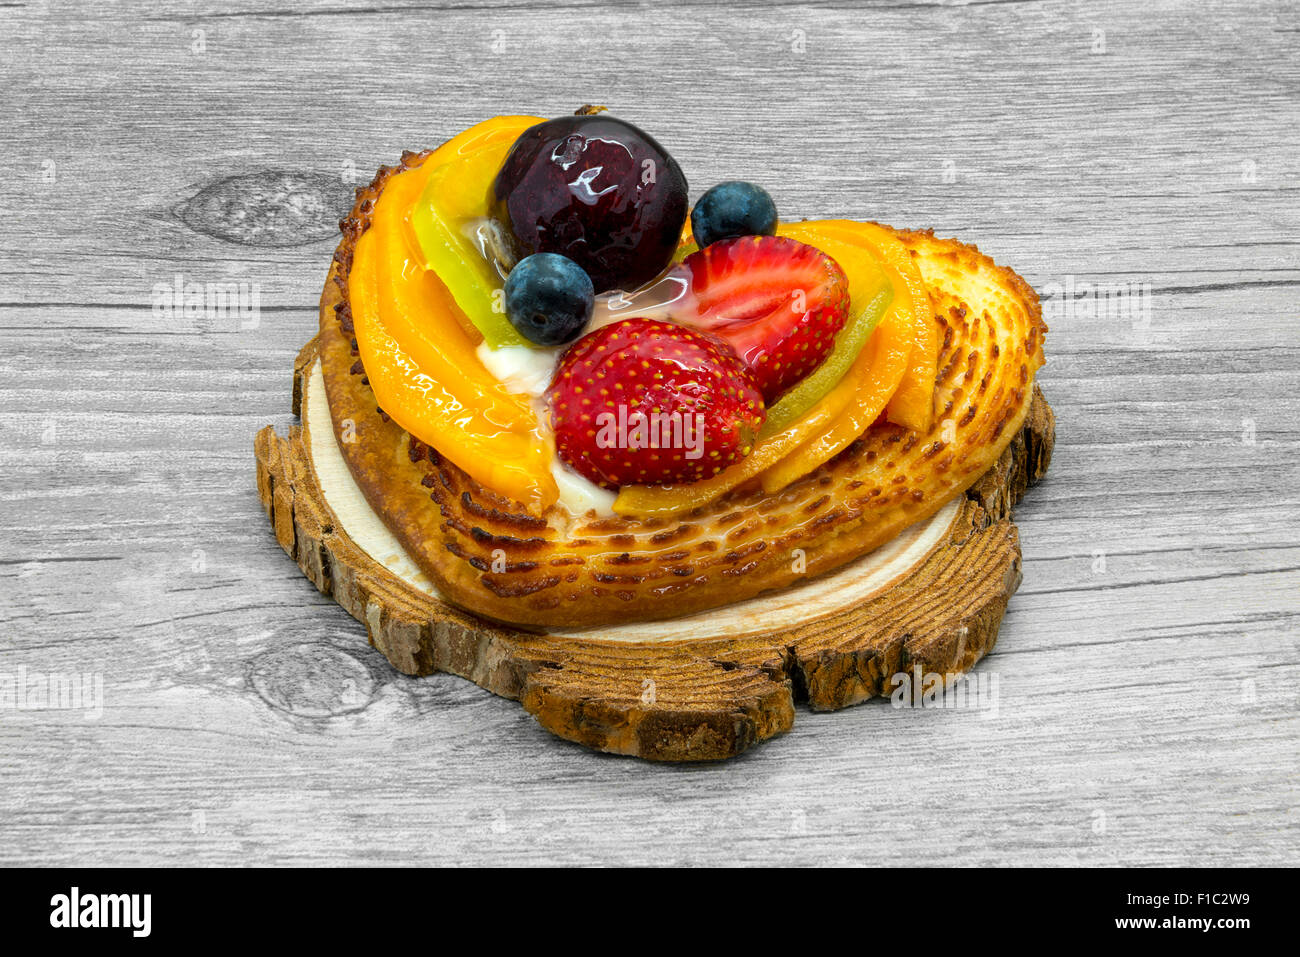 Fruit cake in heart shape on wooden stand Stock Photo